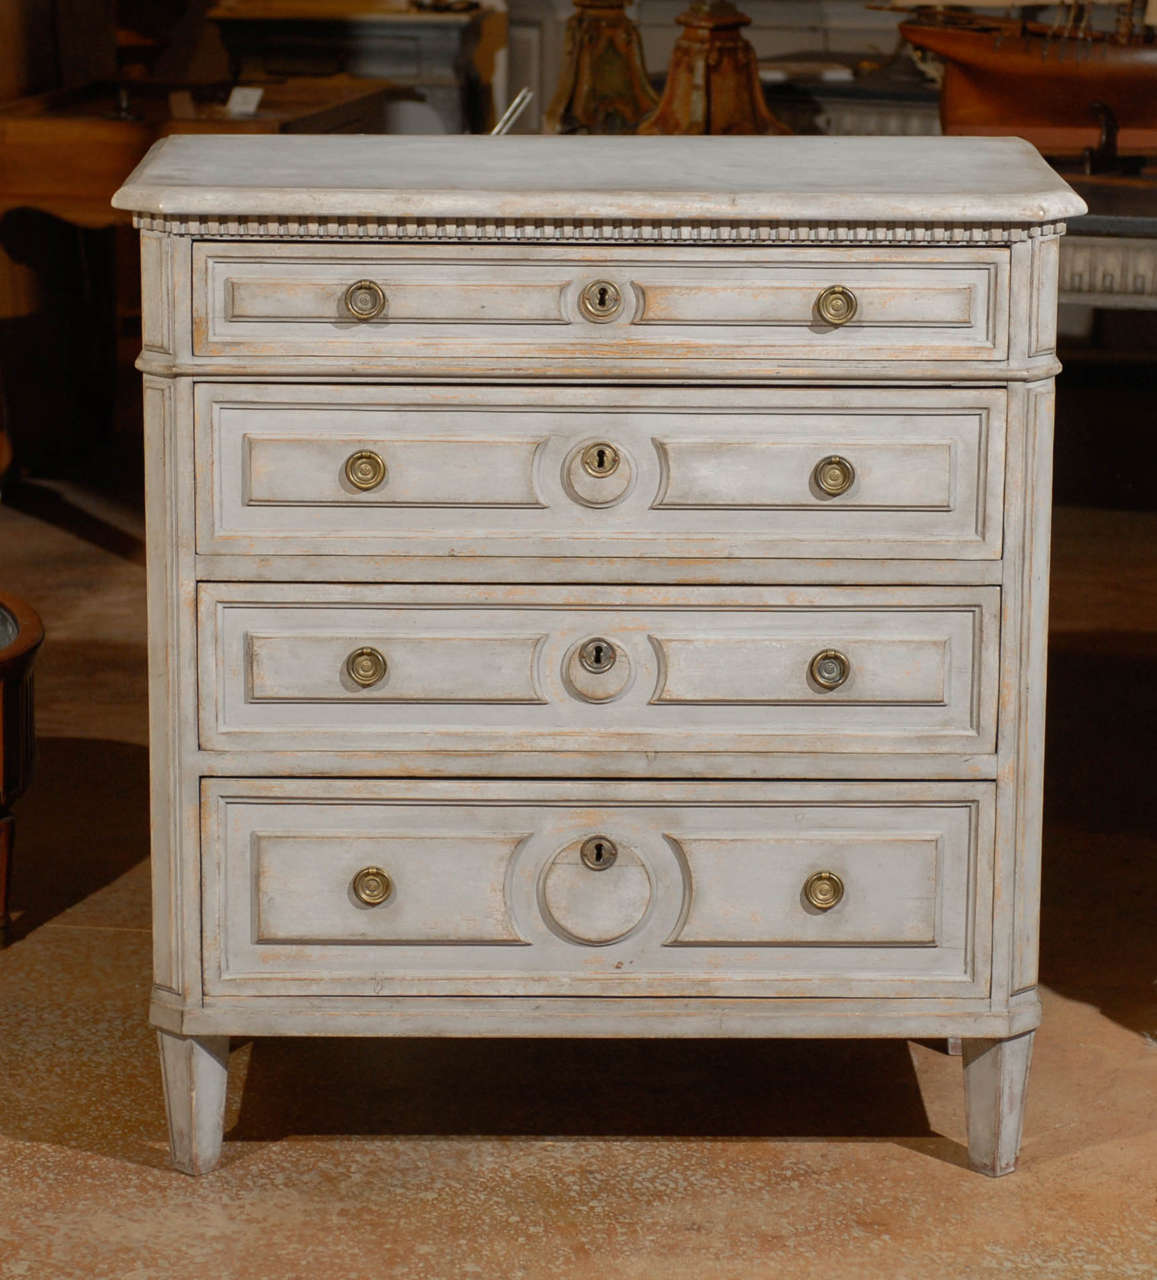 19th Century Painted Swedish Commode. Please Note This Item is an Antique and is One of a Kind. Also Please Refer to Our Website for Our Complete Selection- jadamsantiques.com